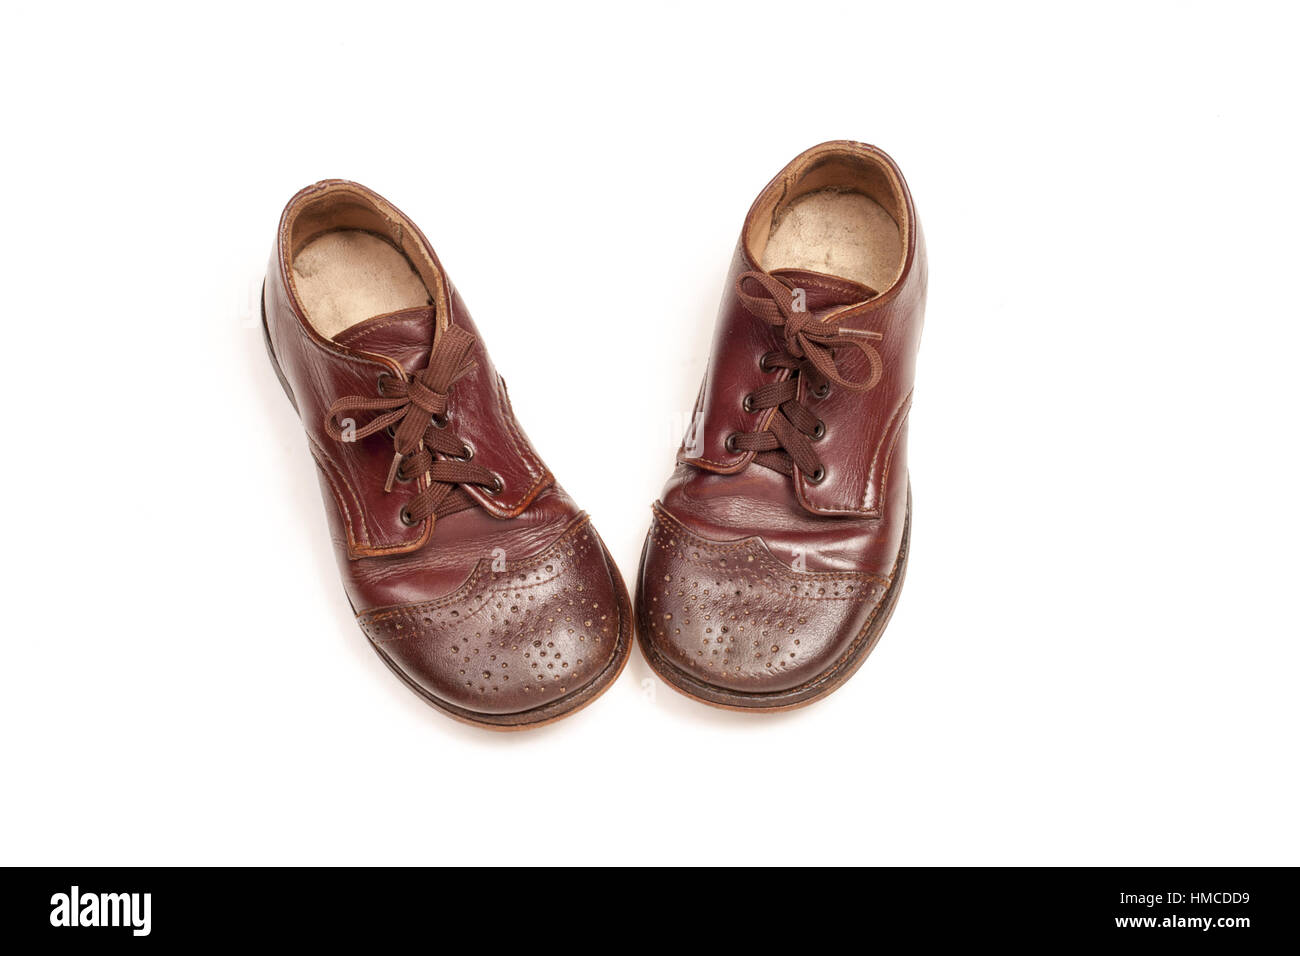 A pair of vintage brown male child-size Brogue, Oxford or Wingtip laces shoes isolated on white. Stock Photo